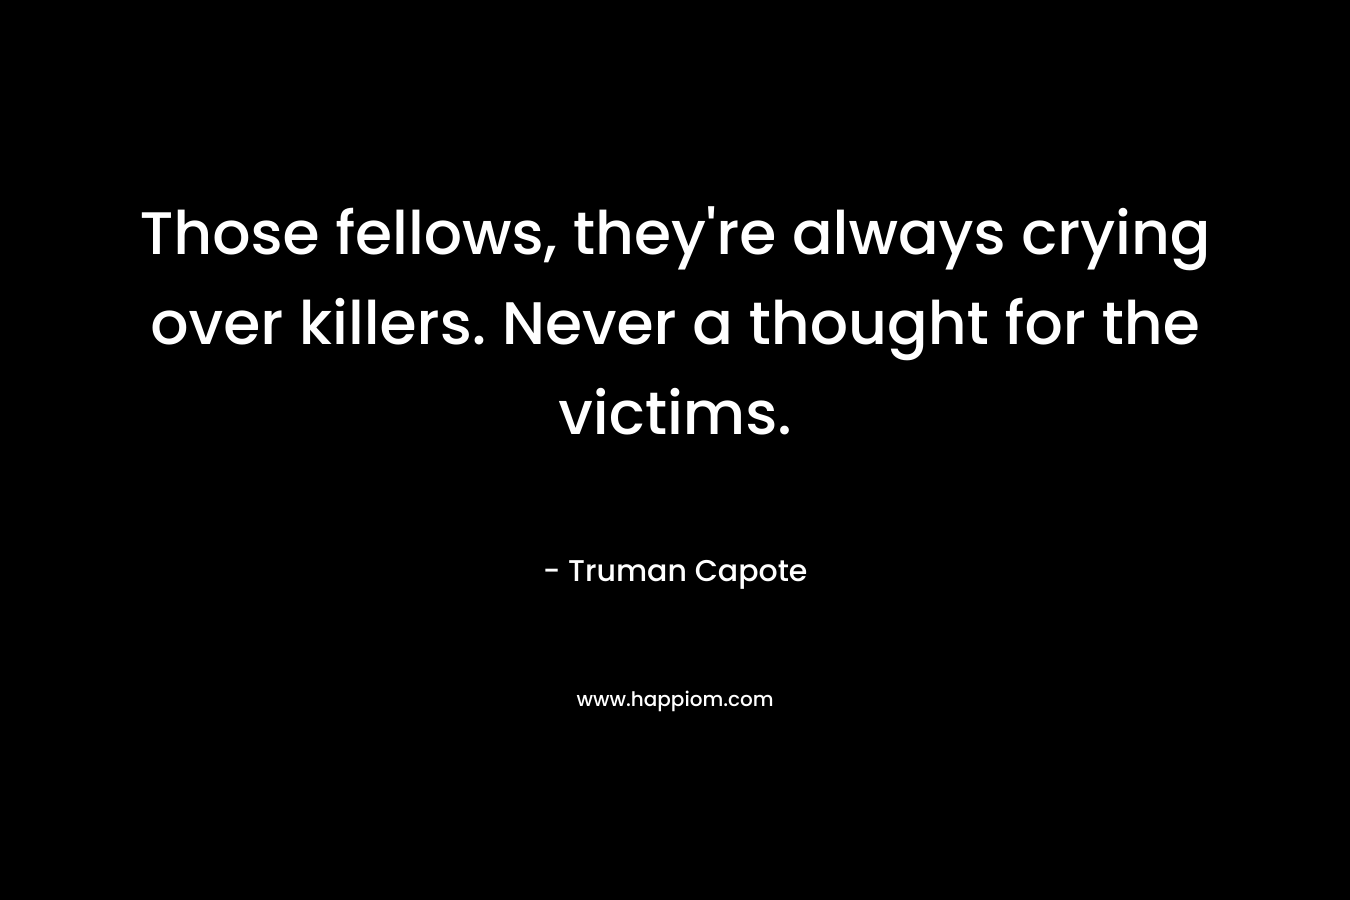 Those fellows, they’re always crying over killers. Never a thought for the victims. – Truman Capote